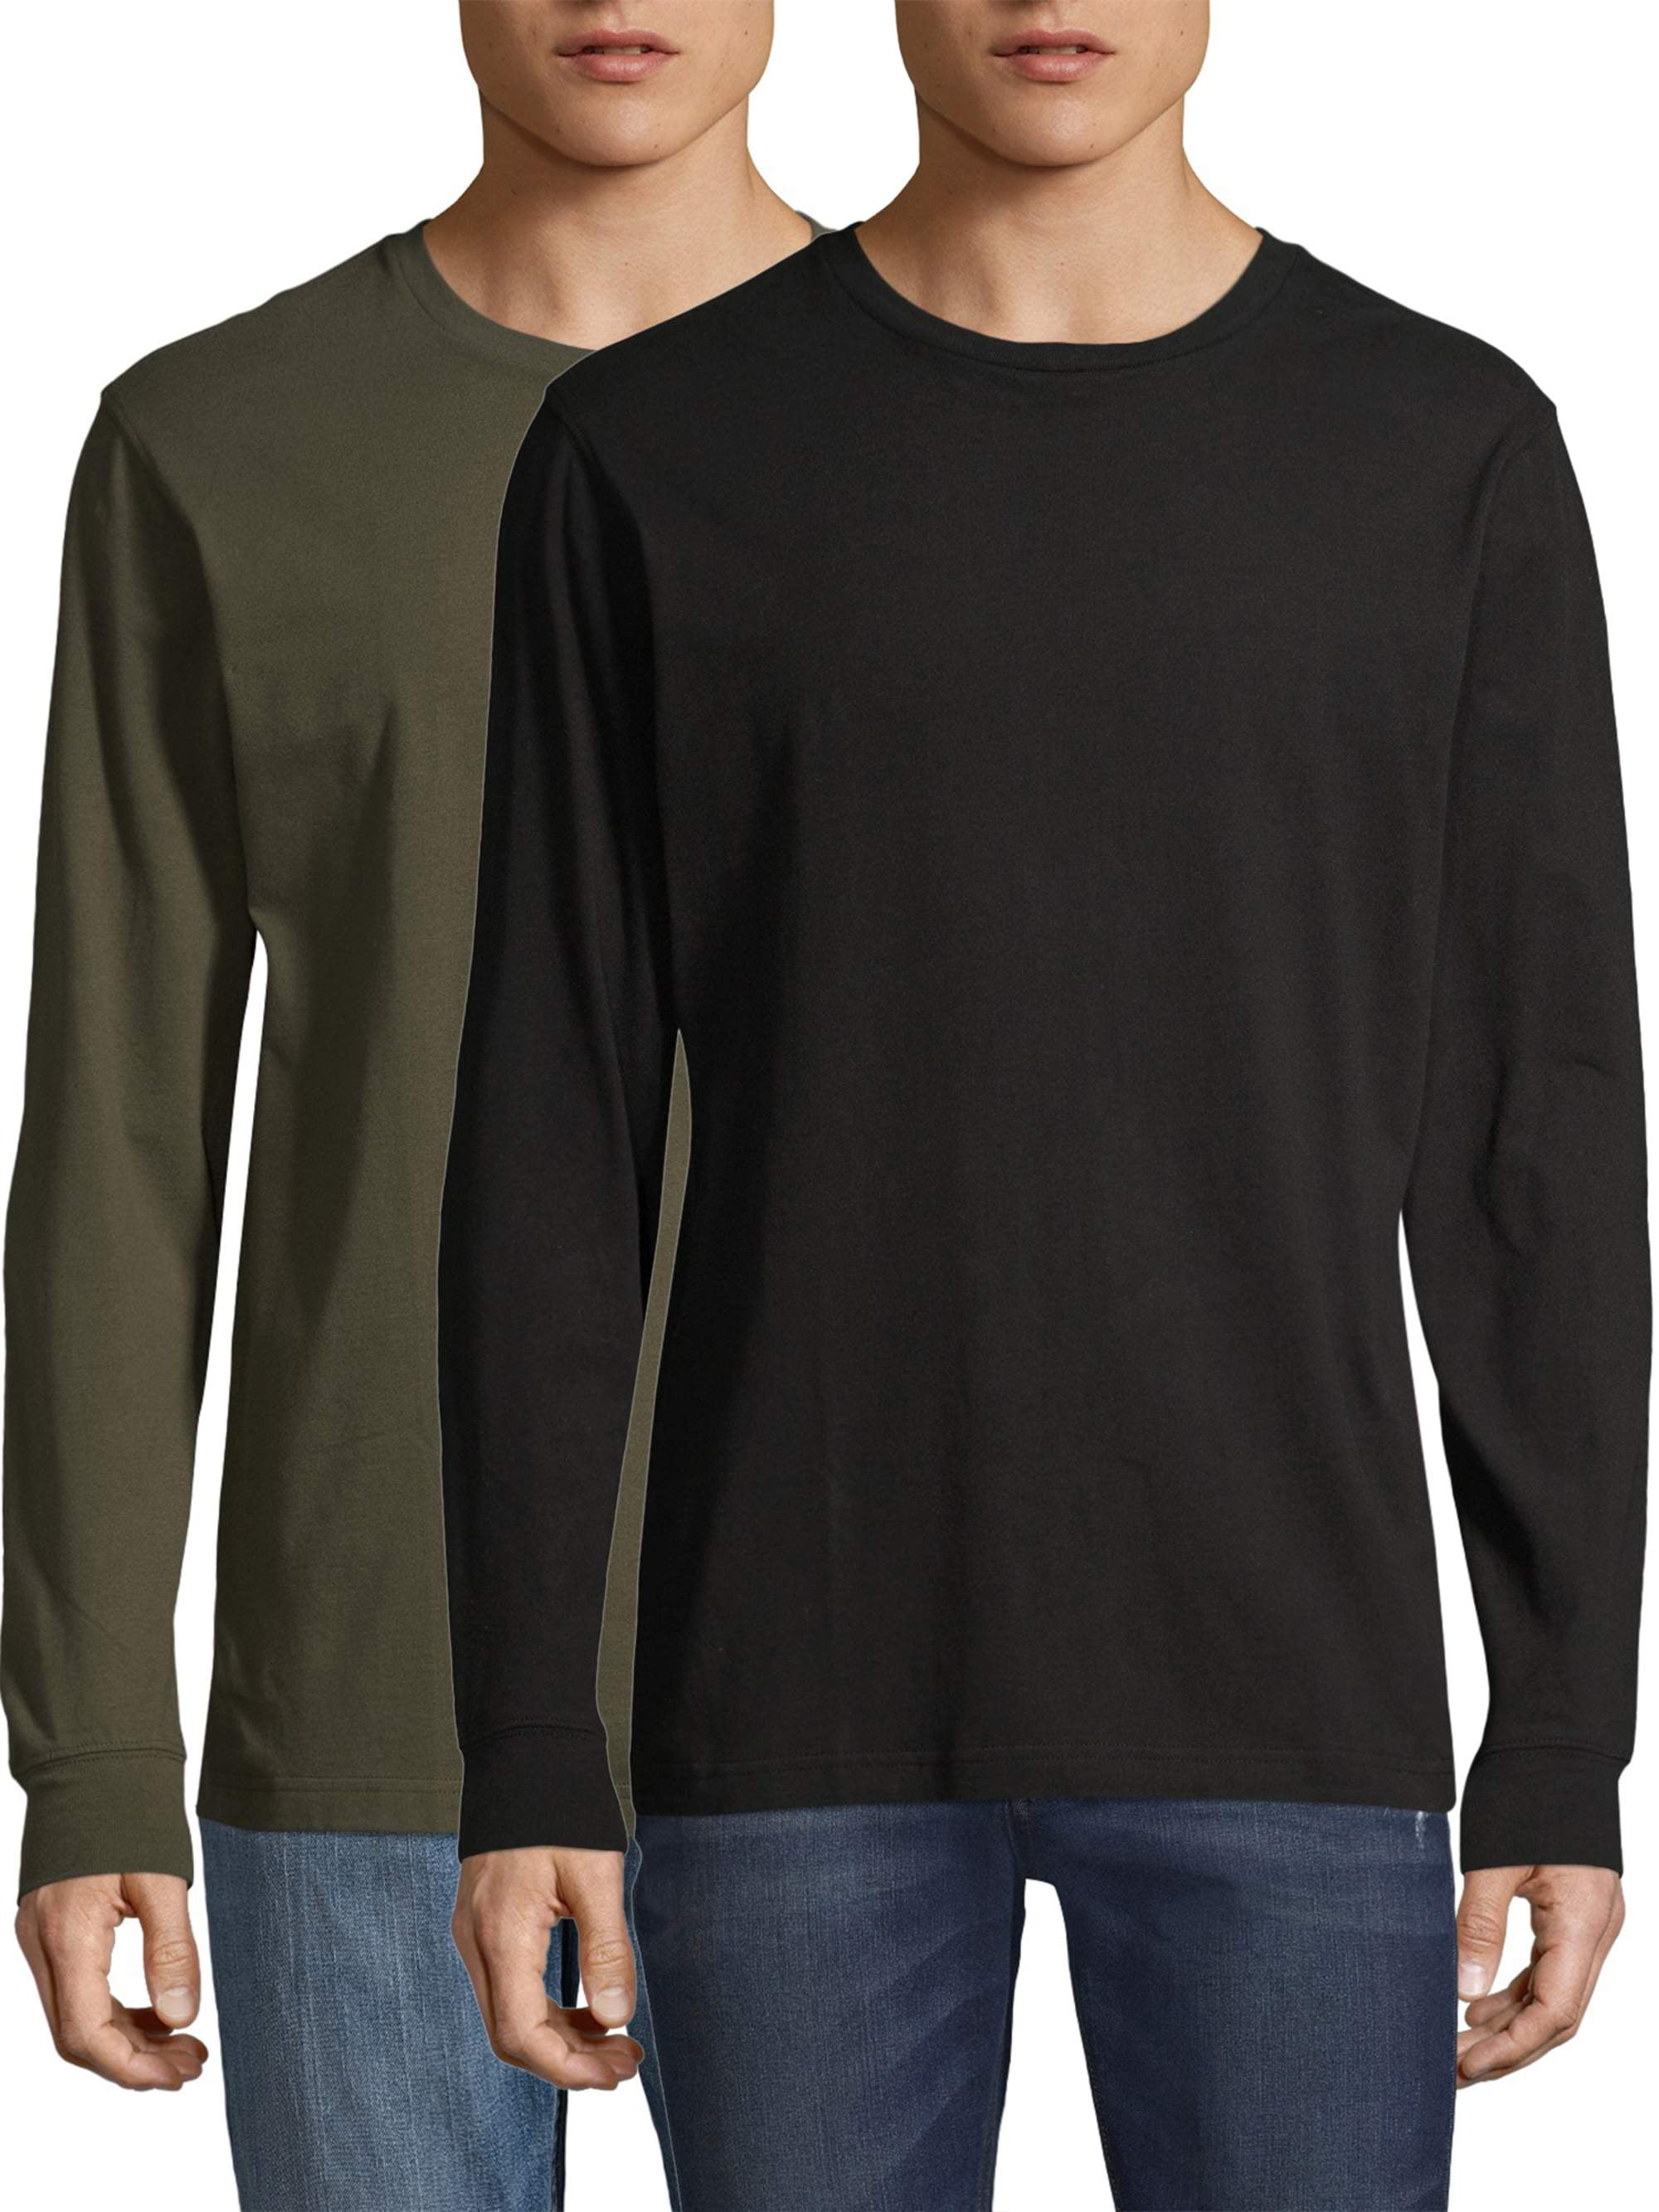 George Men's and Big Men's Long Sleeve Cotton Crew T-Shirt - 2 Pack, up ...